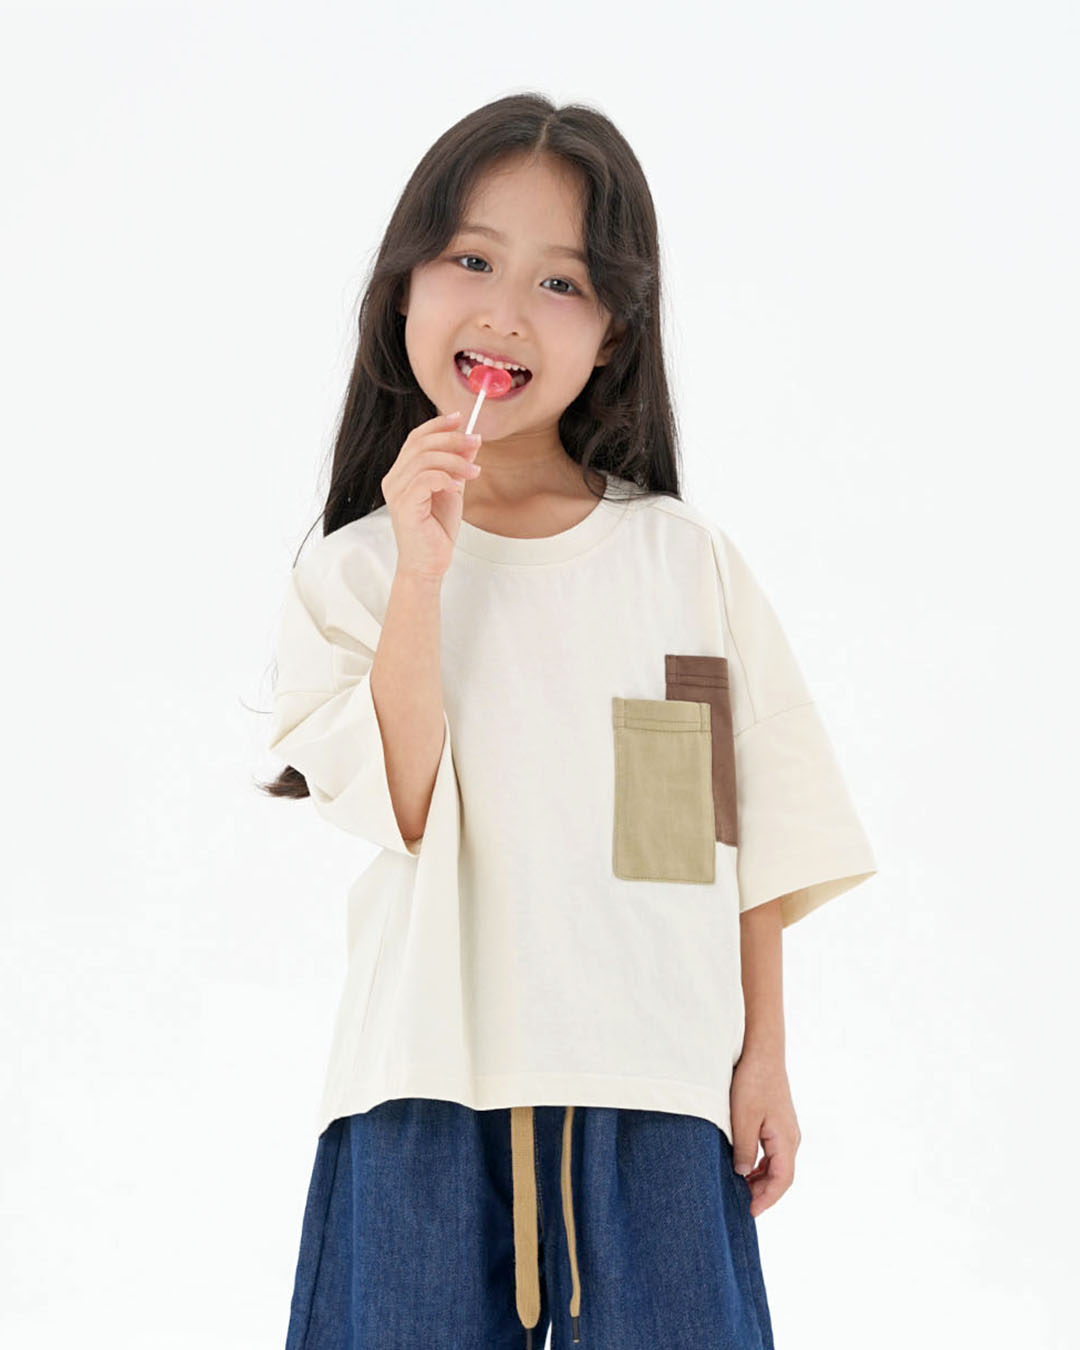 JOPI Kids' Mountain Double Pocket Patchwork T-shirt 2y-9y